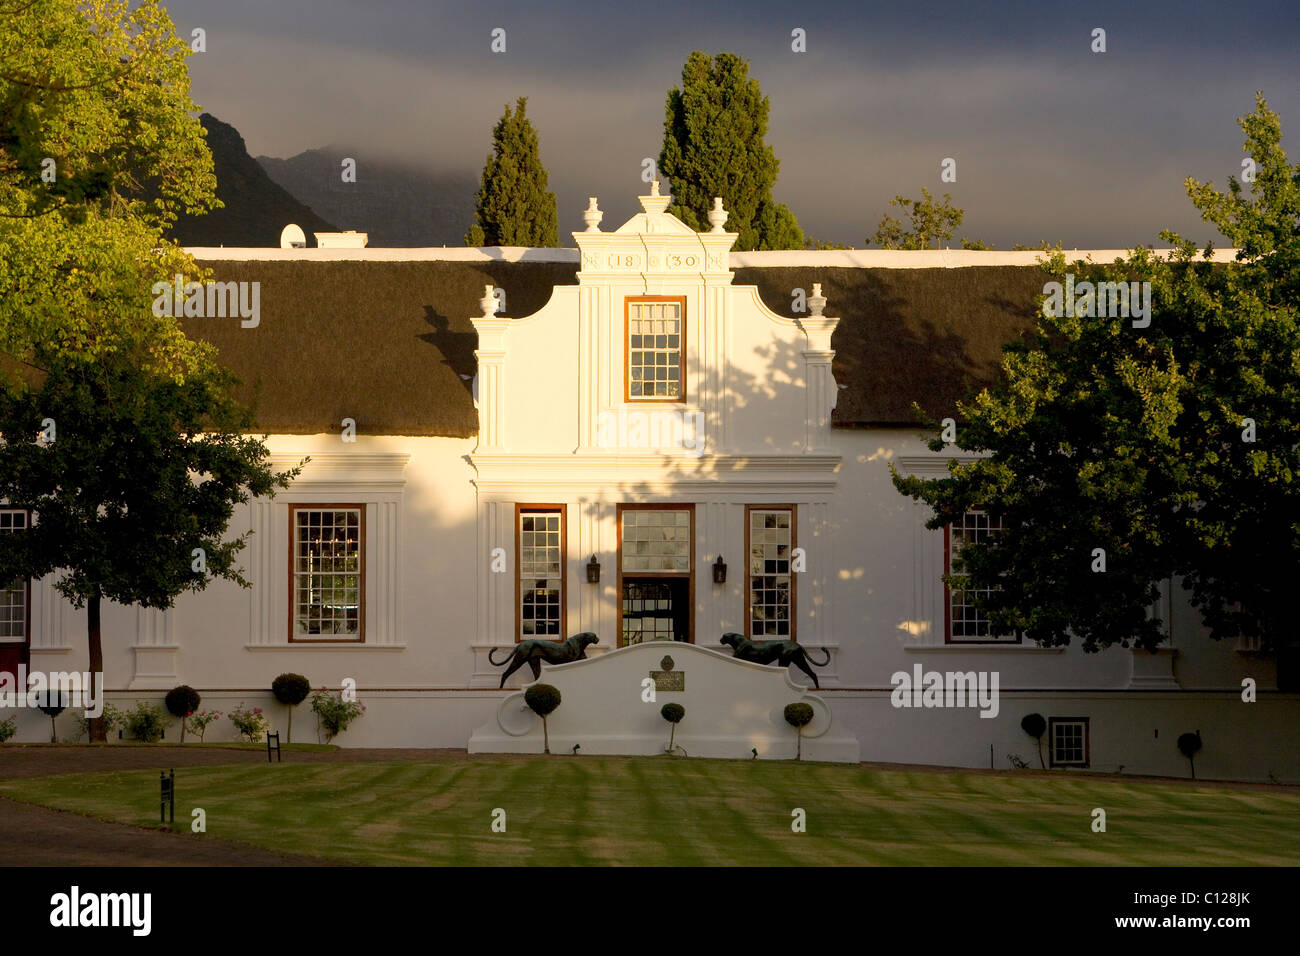 Lanzerac luxury hotel, country house in Cape-Dutch architectural style, Stellenbosch, Winelands, Cape Town, South Africa, Africa Stock Photo